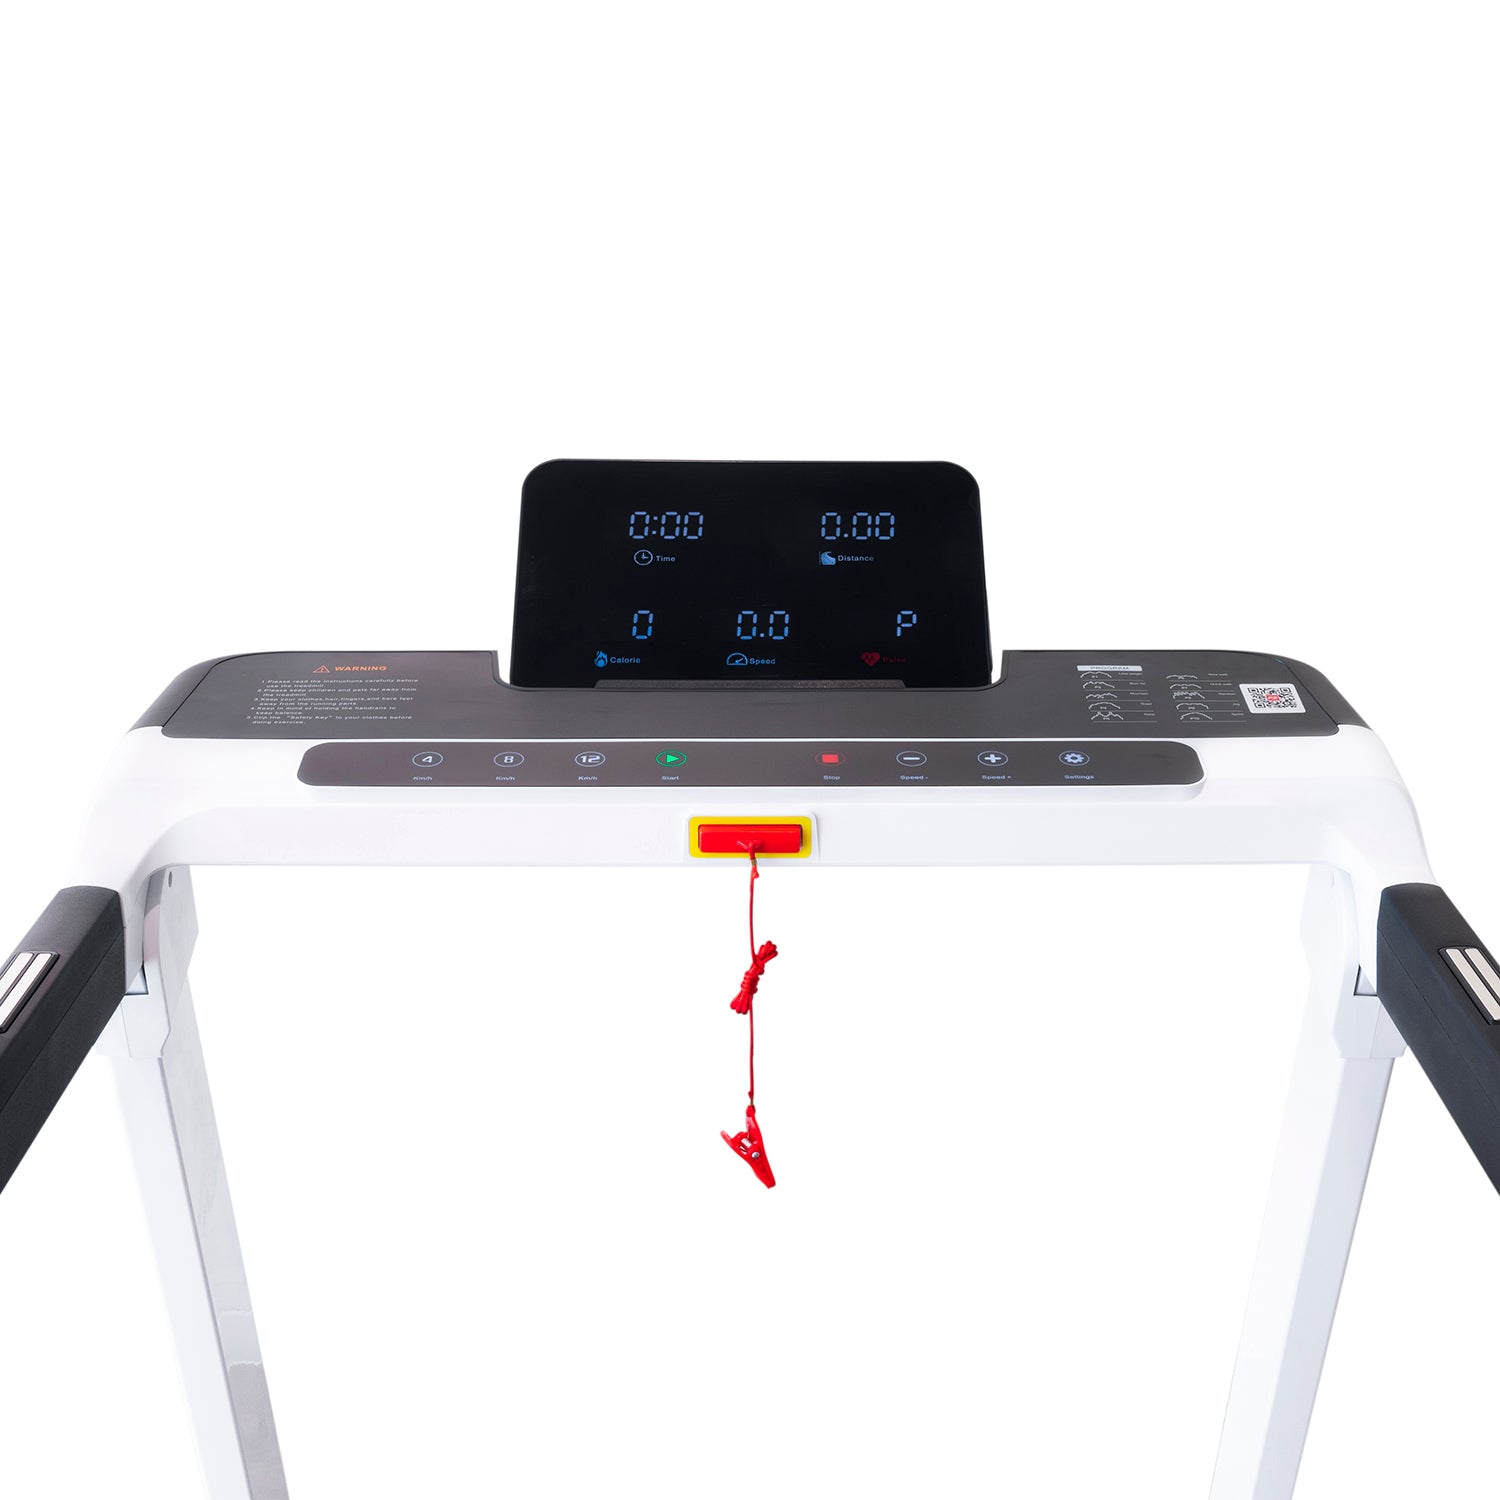 Starke T60 Lightweight Walking and Running Electric Treadmill with Bluetooth - Free Shipping